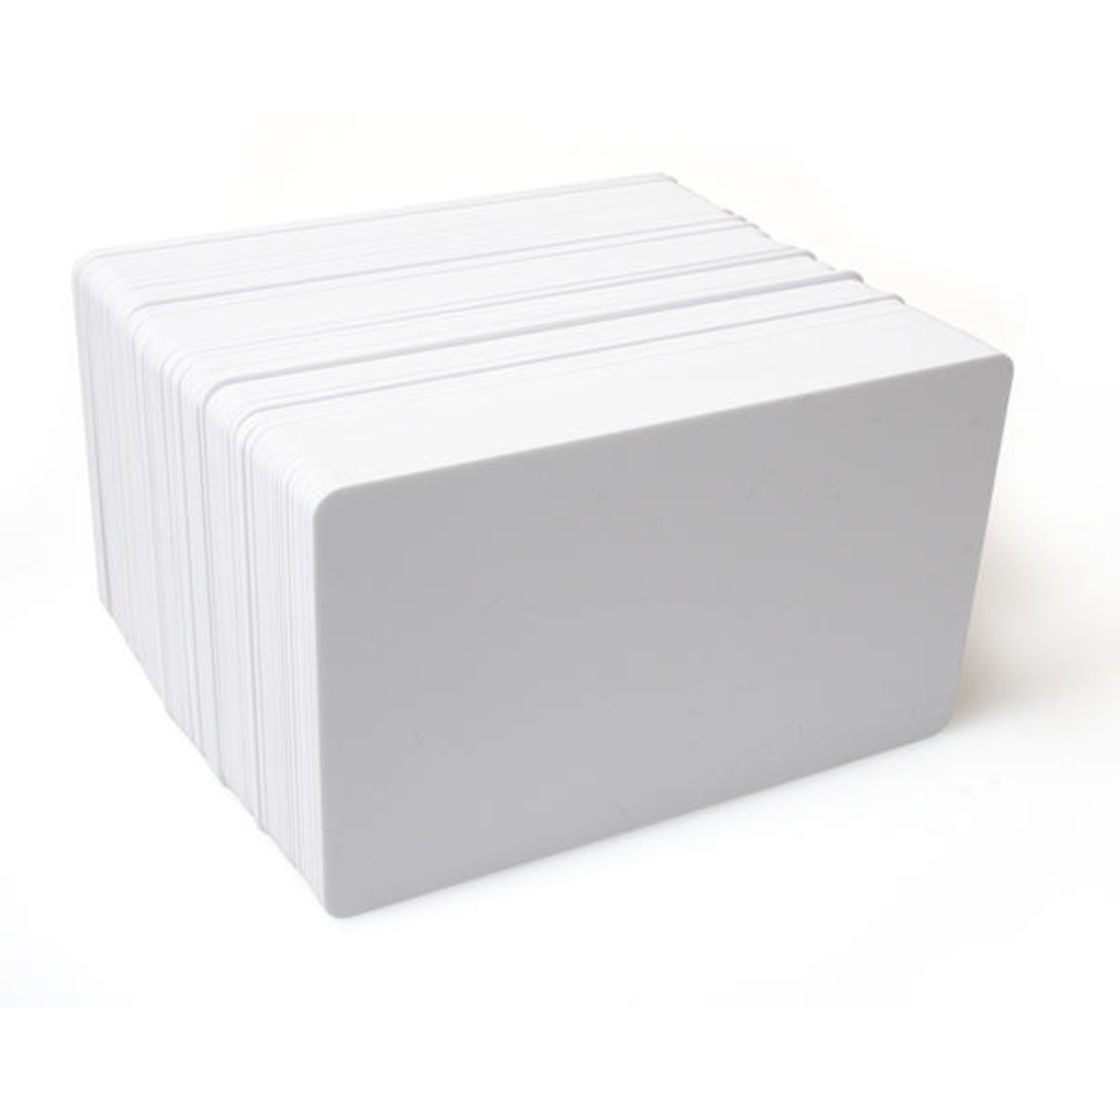 Pack of 10 Java J2A080 White Composite PVC Cards w/HiCo 2 Track J2 V2.4.1 JCOP21-72K by My ID City 